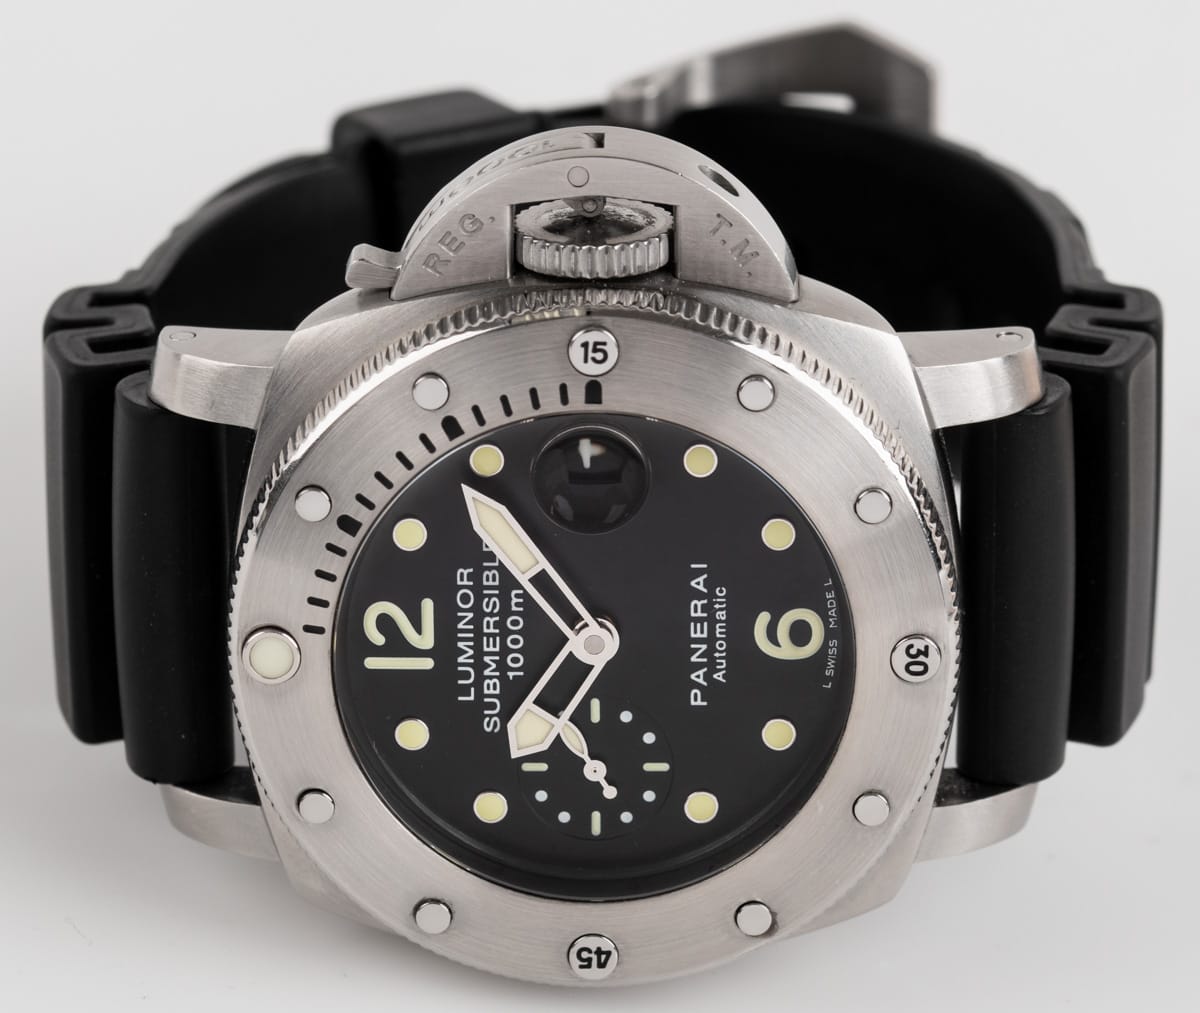 Front View of Luminor 1950 1000m Submersible